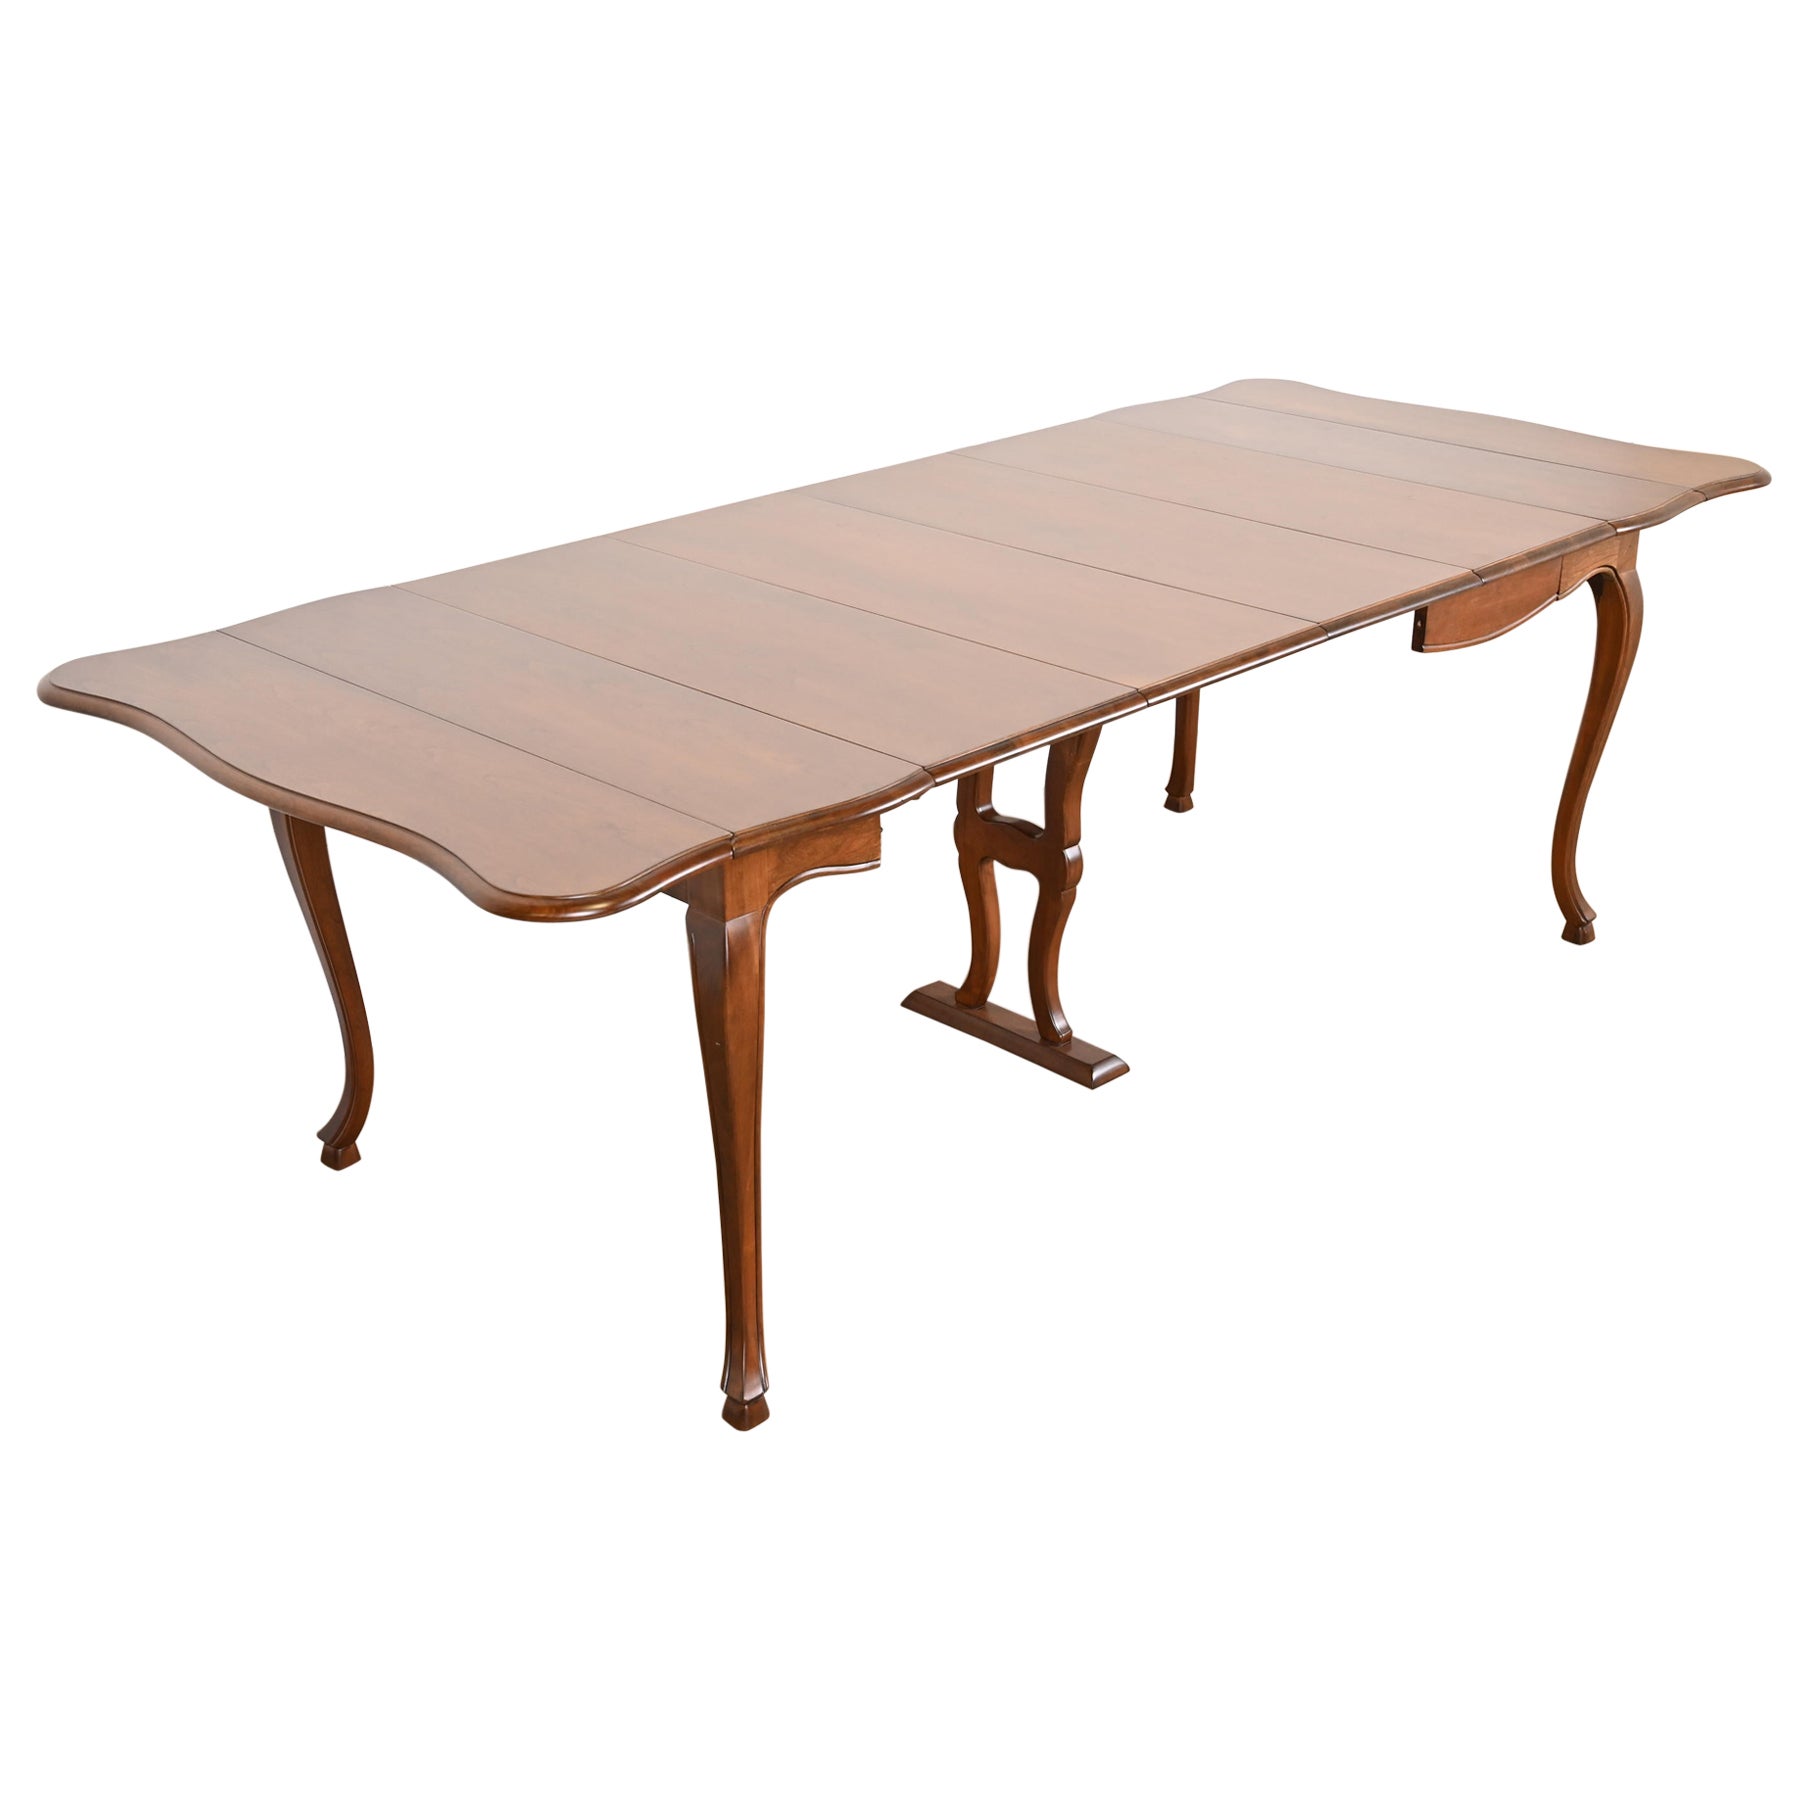 John Widdicomb French Provincial Cherry Wood Dining Table, Newly Refinished